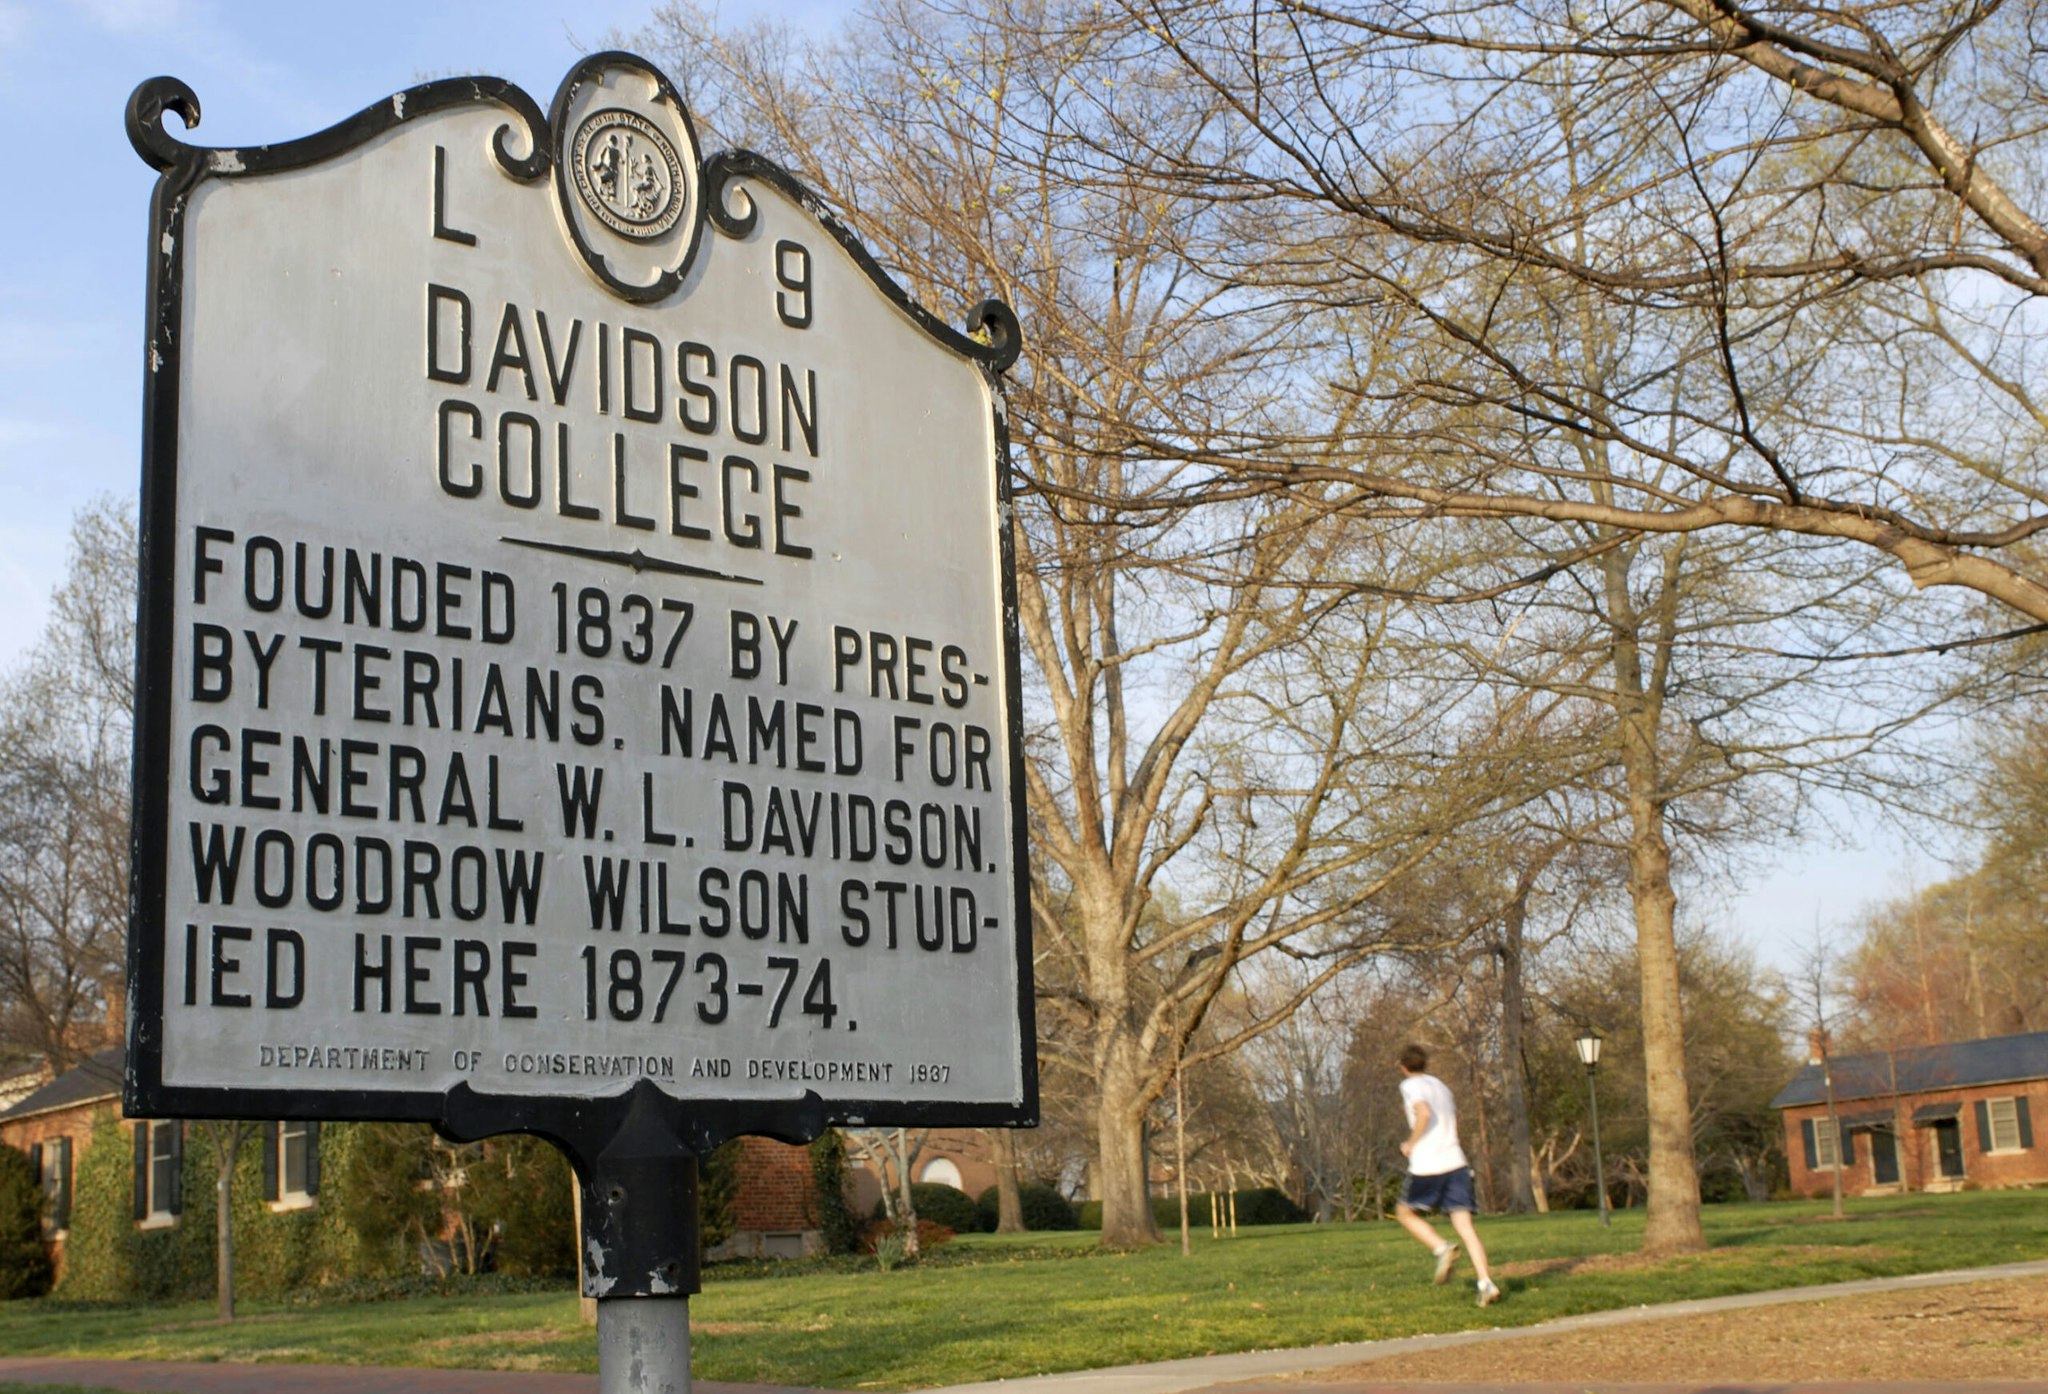 A runner passes a sign on the campus of Davidson College in Davidson, North Carolina, Monday, March 19, 2007.